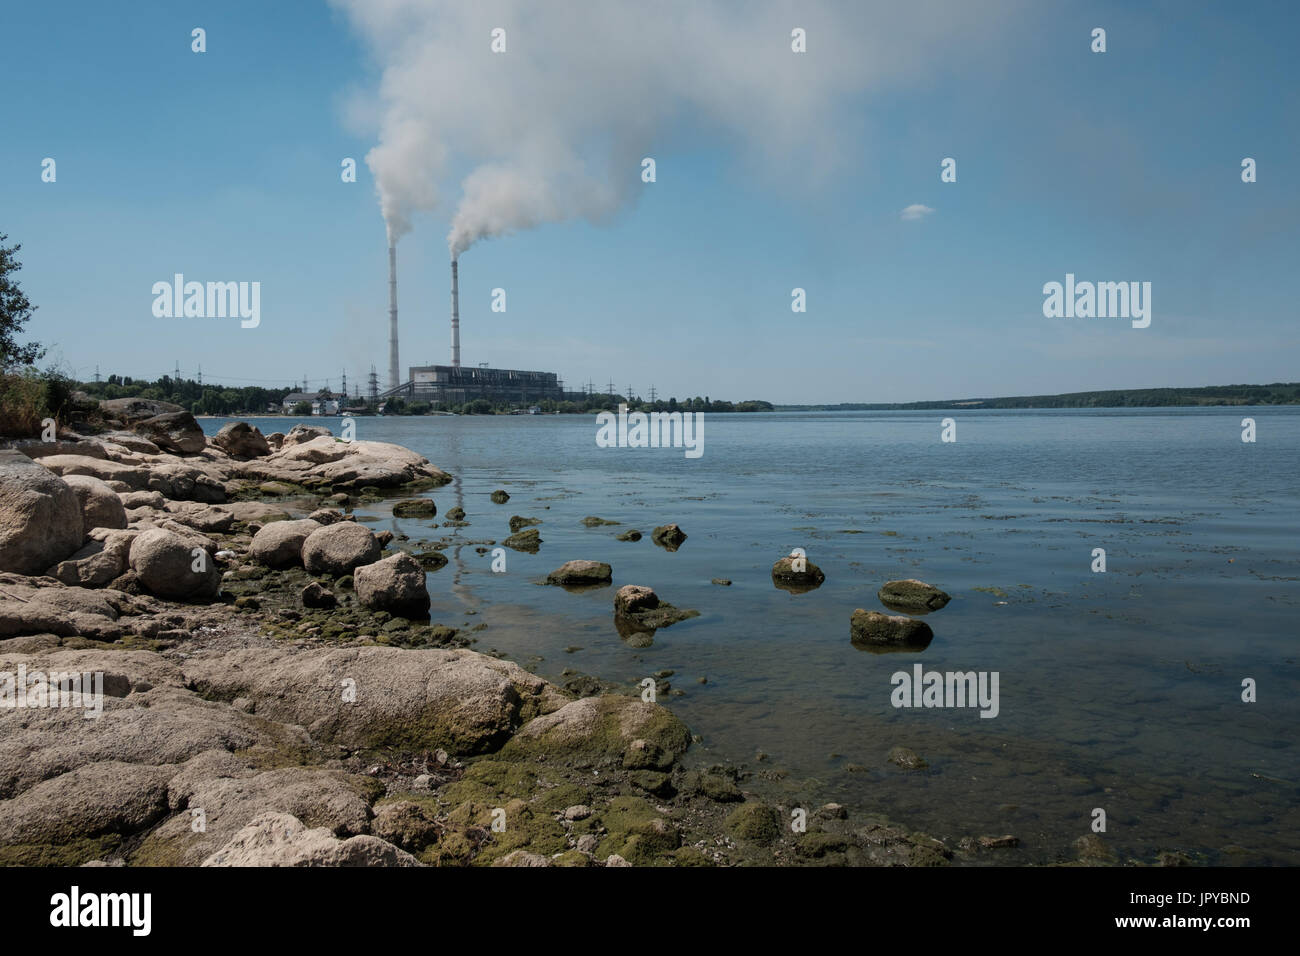 In the summer, there is very little water in the Southern Bug River near the town of Ladyzhin because of the hot weather and the enterprises take water for their needs. In the background there is a power station. Stock Photo